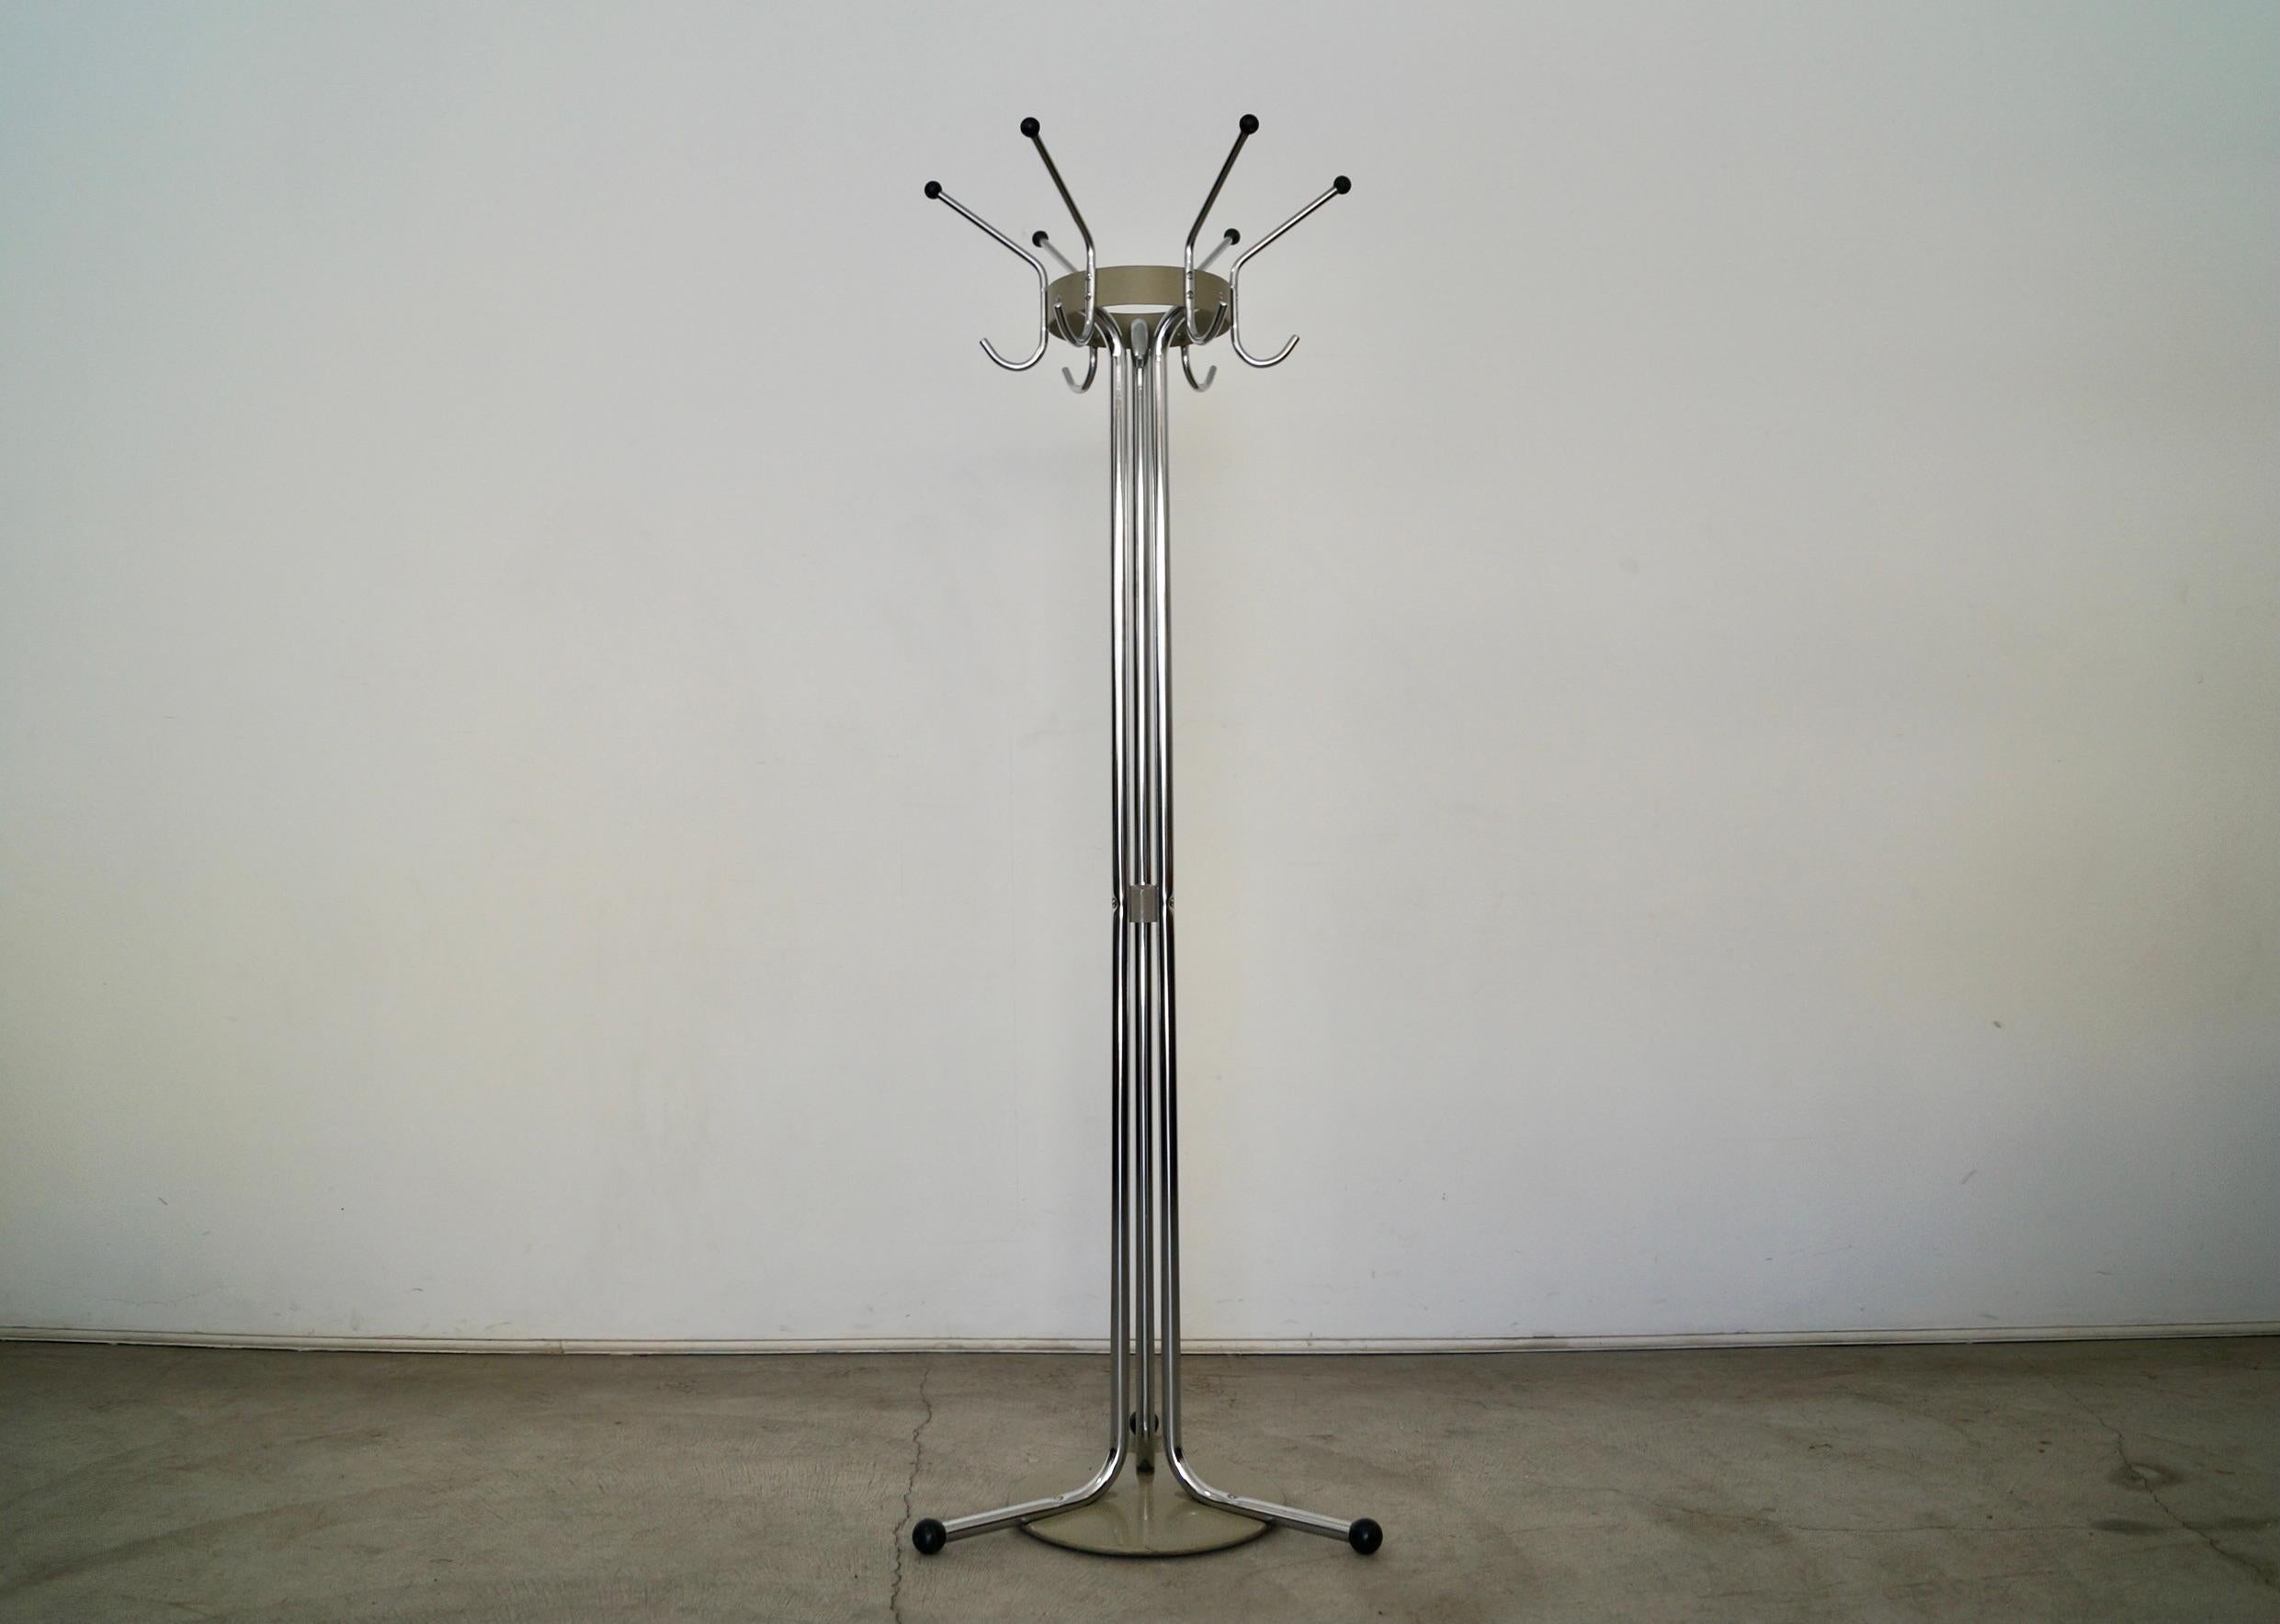 Vintage true Art Deco Mid-century Modern gem for sale. From the 1940's industrial machine age period, and stunning. It's made of thick tubular chrome and metal, and is in incredible condition. It has six hooks for hats, coats, bags, and umbrellas.